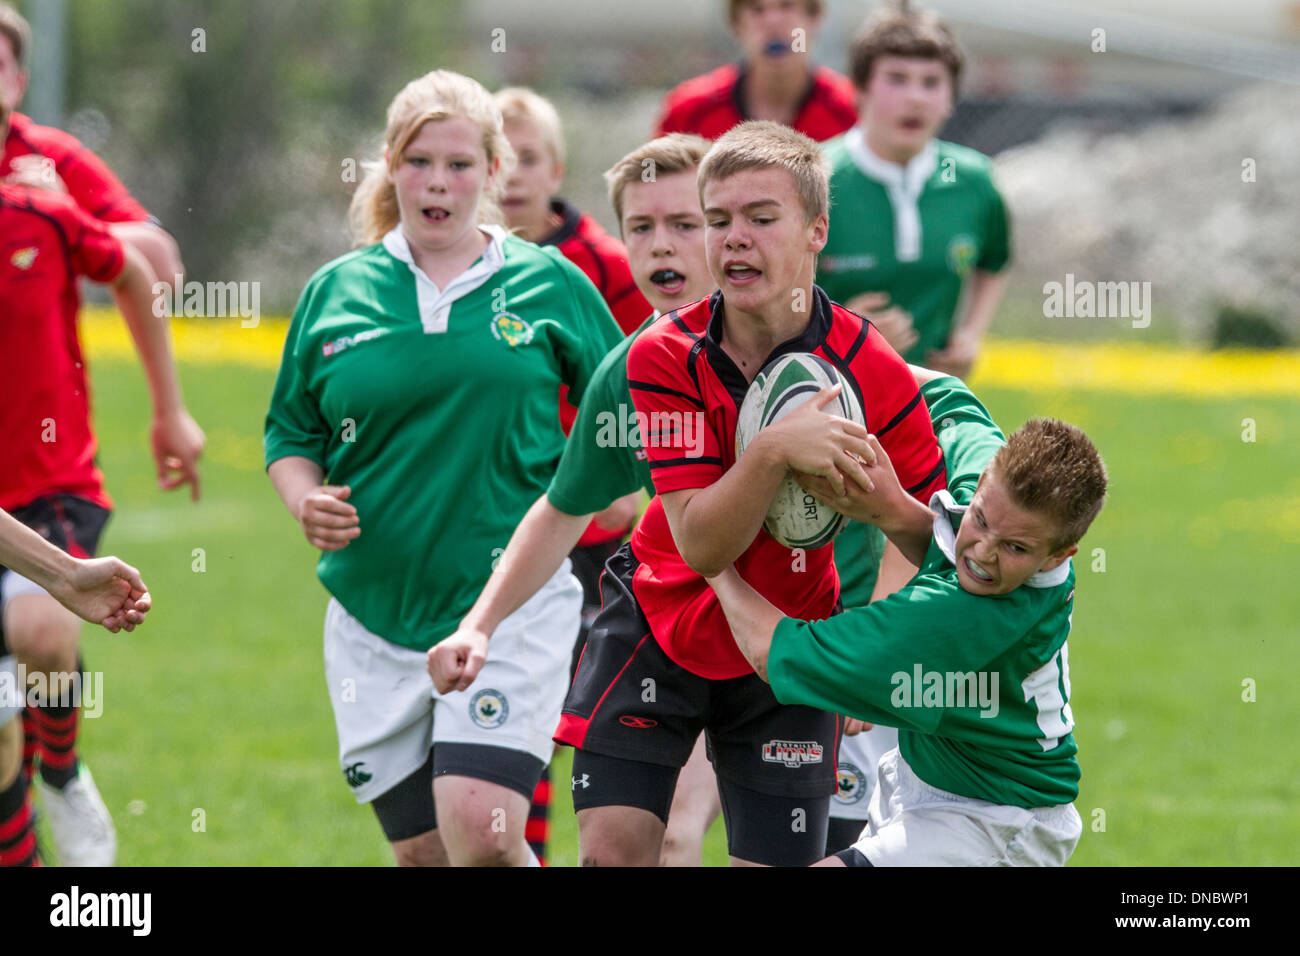 Athletic boys playing sports, high school rugby football Stock Photo